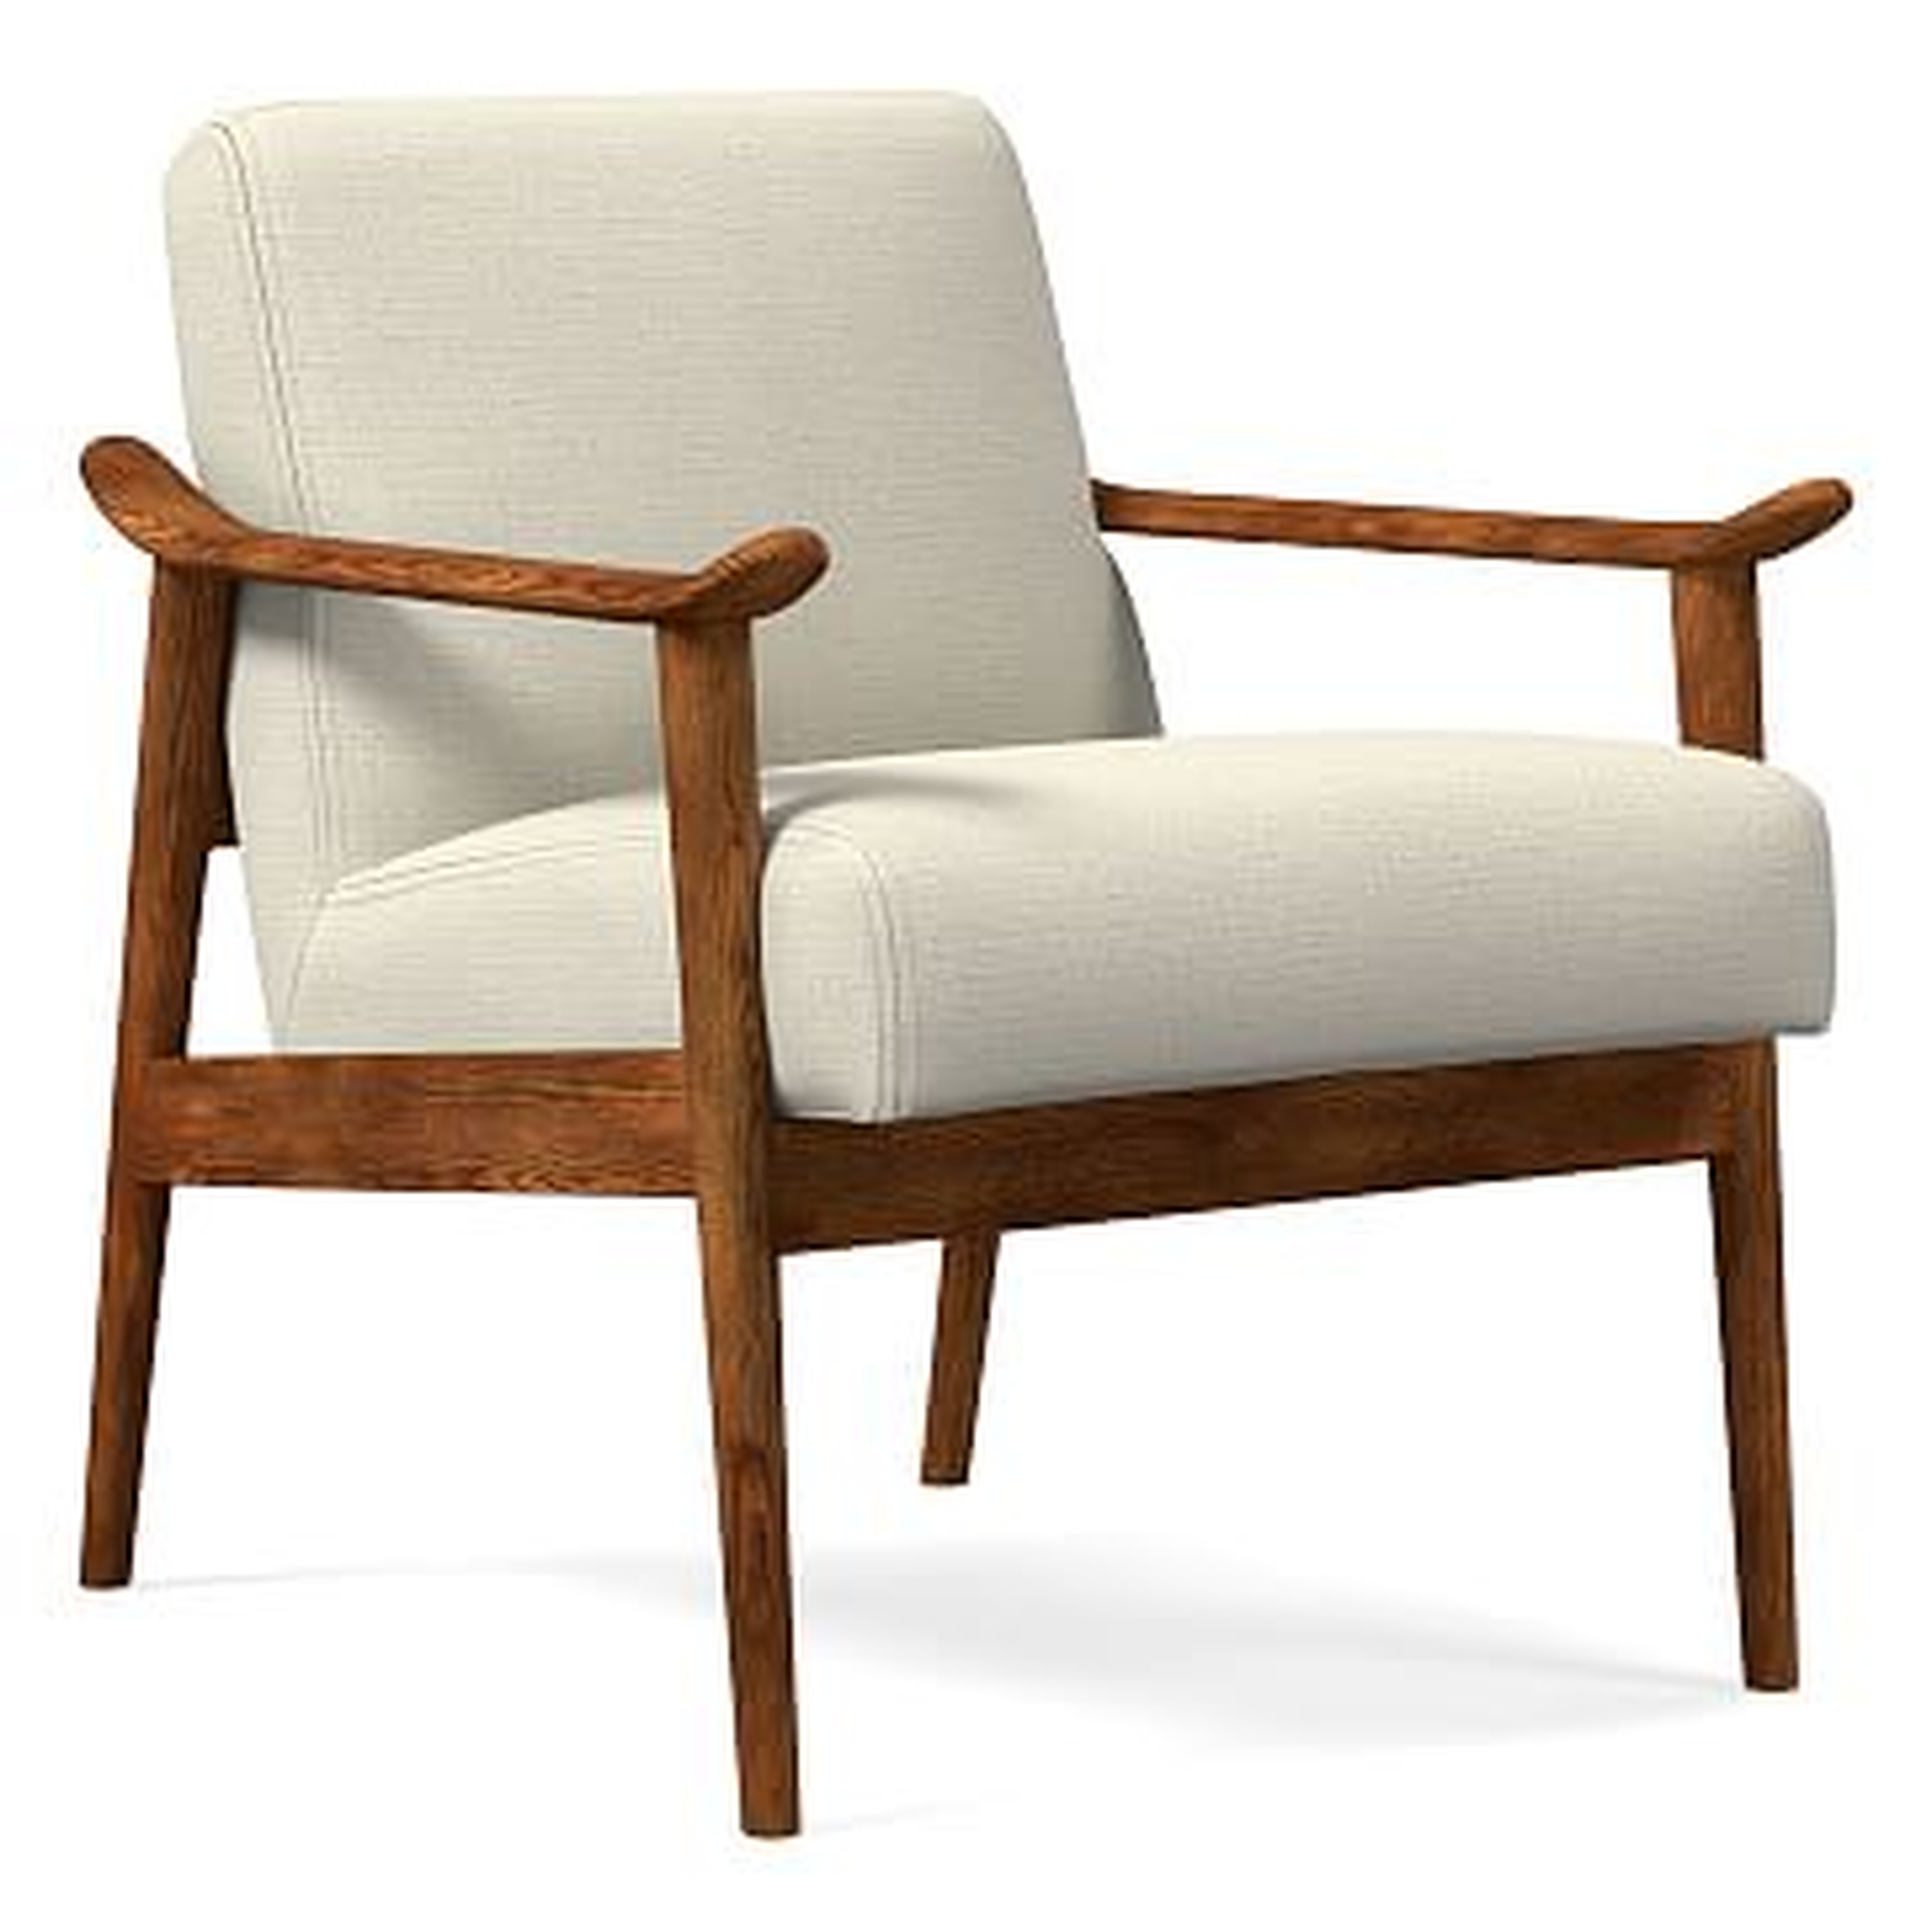 Mid-Century Show Wood Upholstered Chair, Chunky Basketweave, Clay, Set of 2 - West Elm